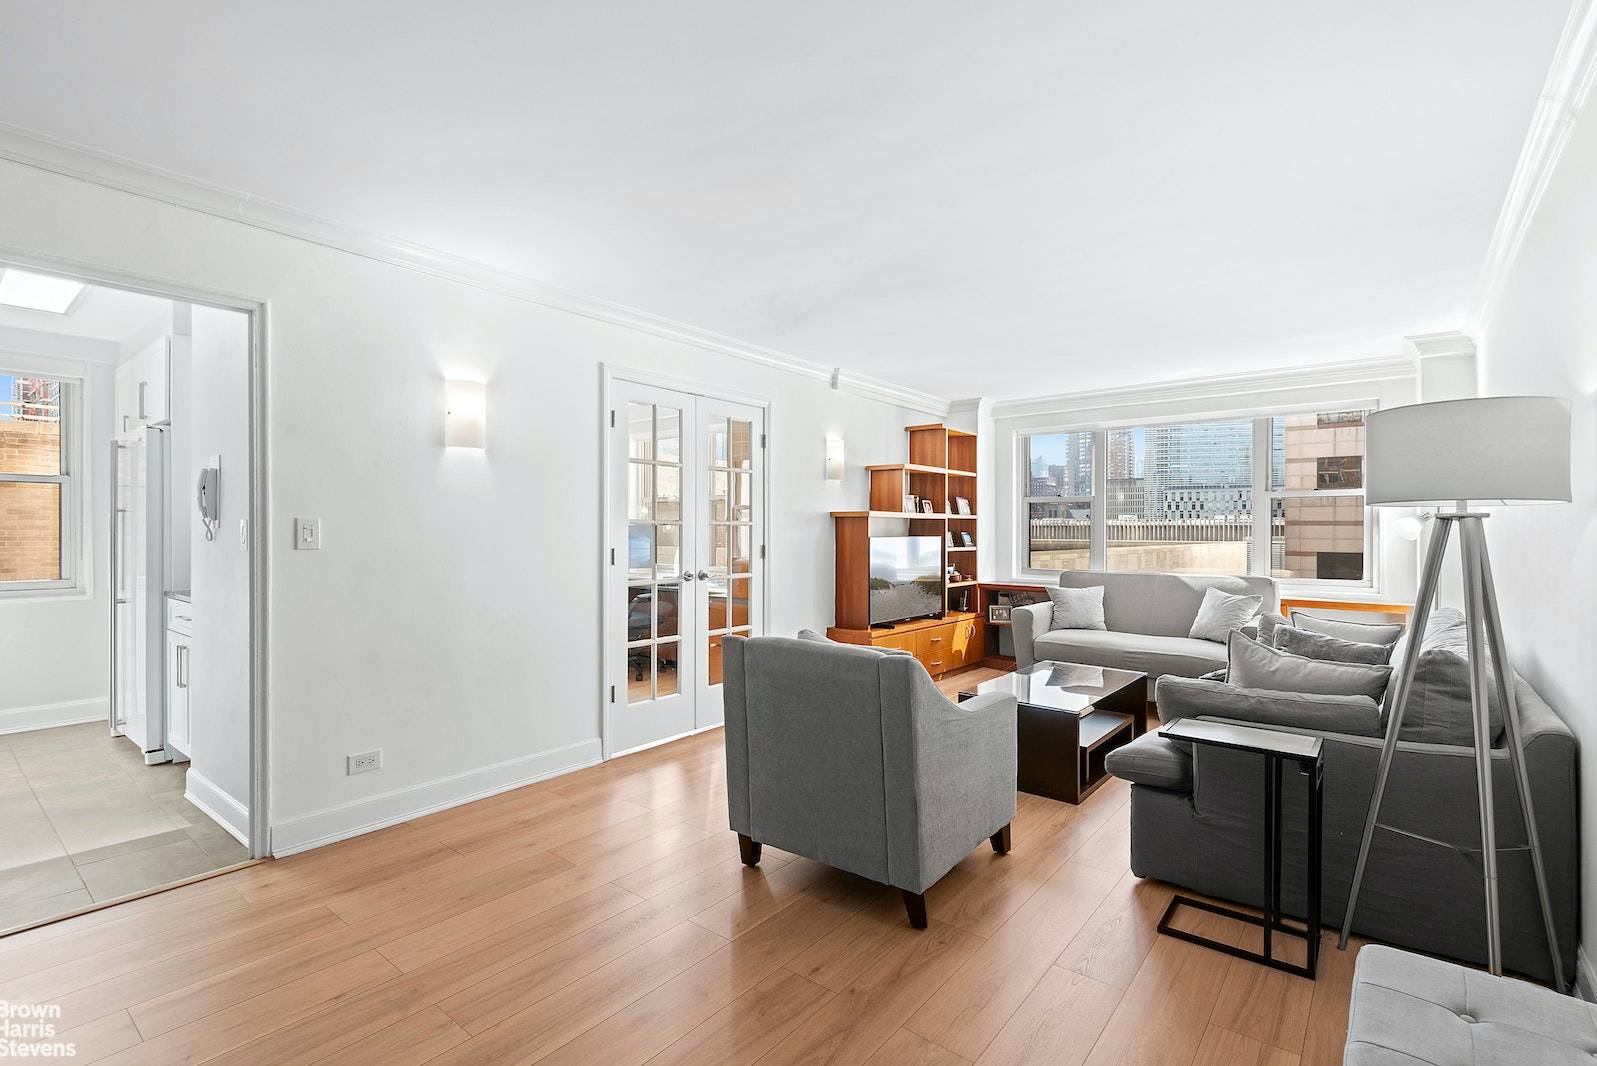 PRICED TO SELL 999, 000Move right in to this beautifully designed, spacious two bedroom home that offers stunning city views and all day sun with its South East exposure.